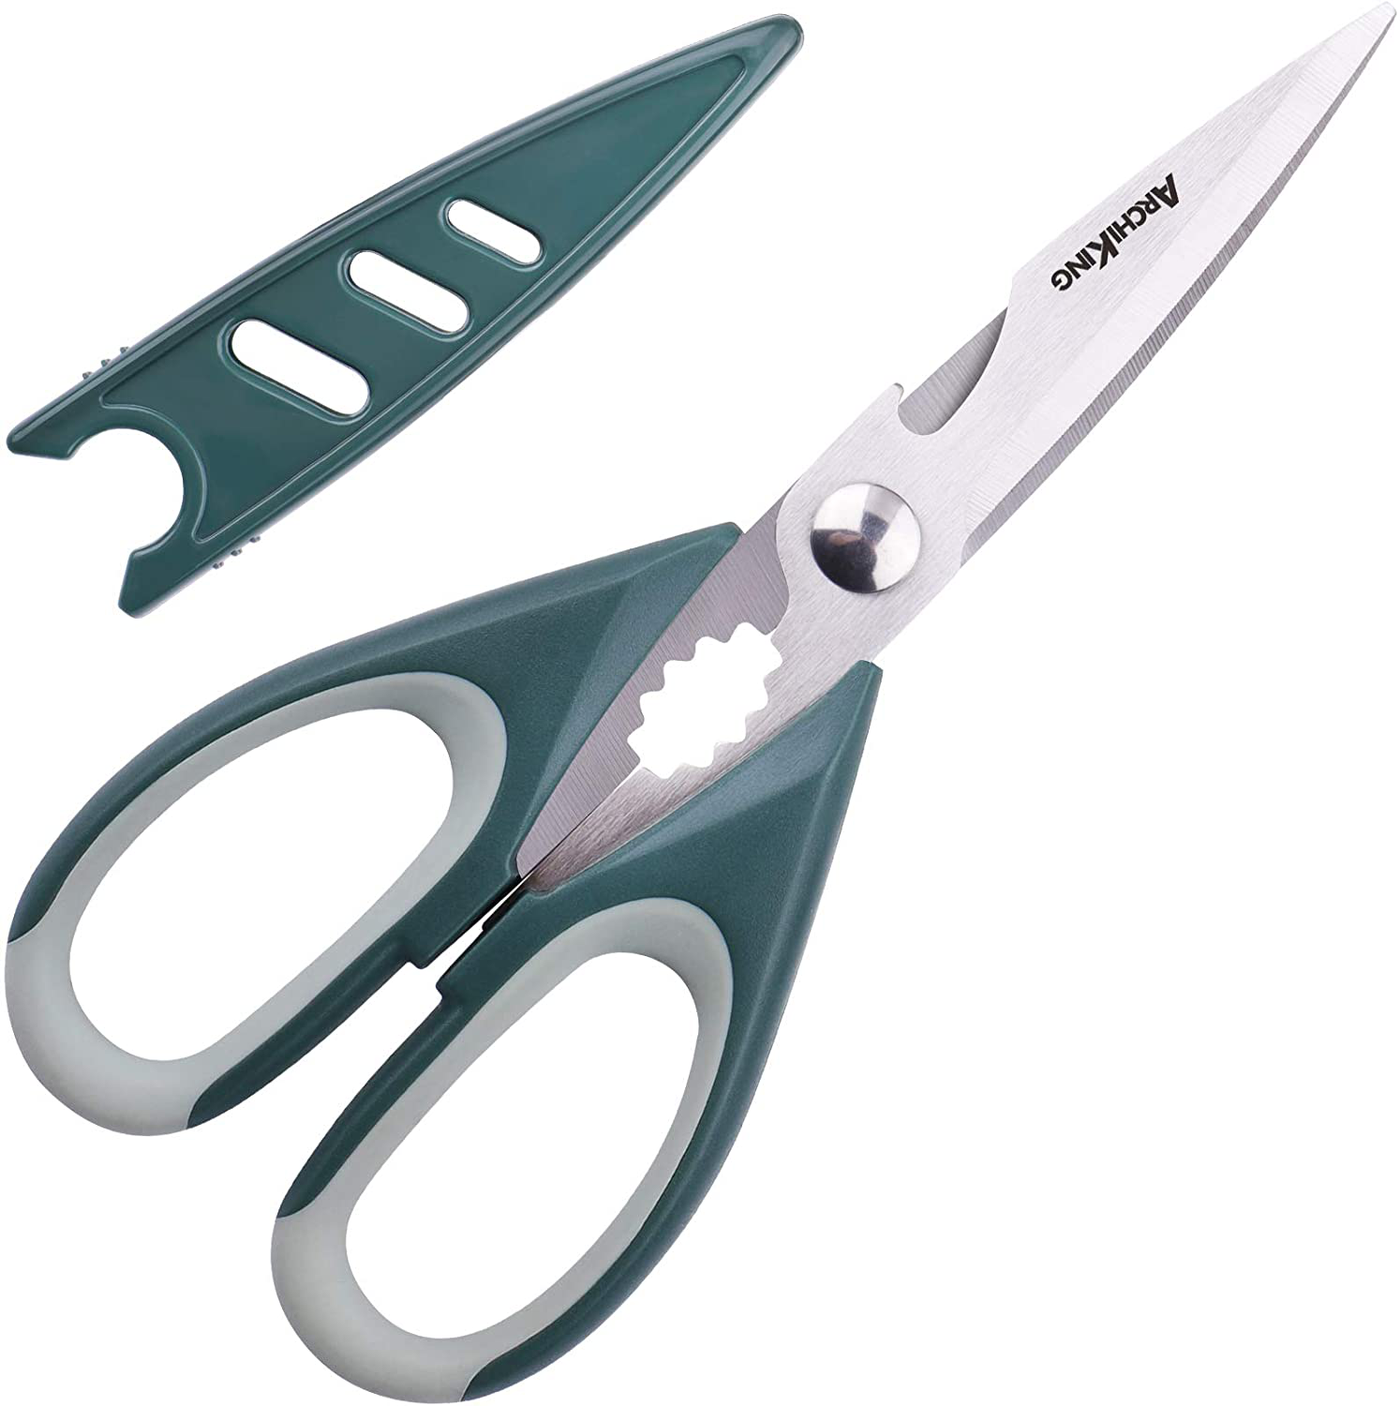 Kitchen Shears, ARCHIKING All-purpose Kitchen Scissors, Heavy Duty Sharp Cooking Shears Dishwasher Safe, Professional Stainless Steel Scissors for Food Meat Chicken Poultry Fish Vegetable